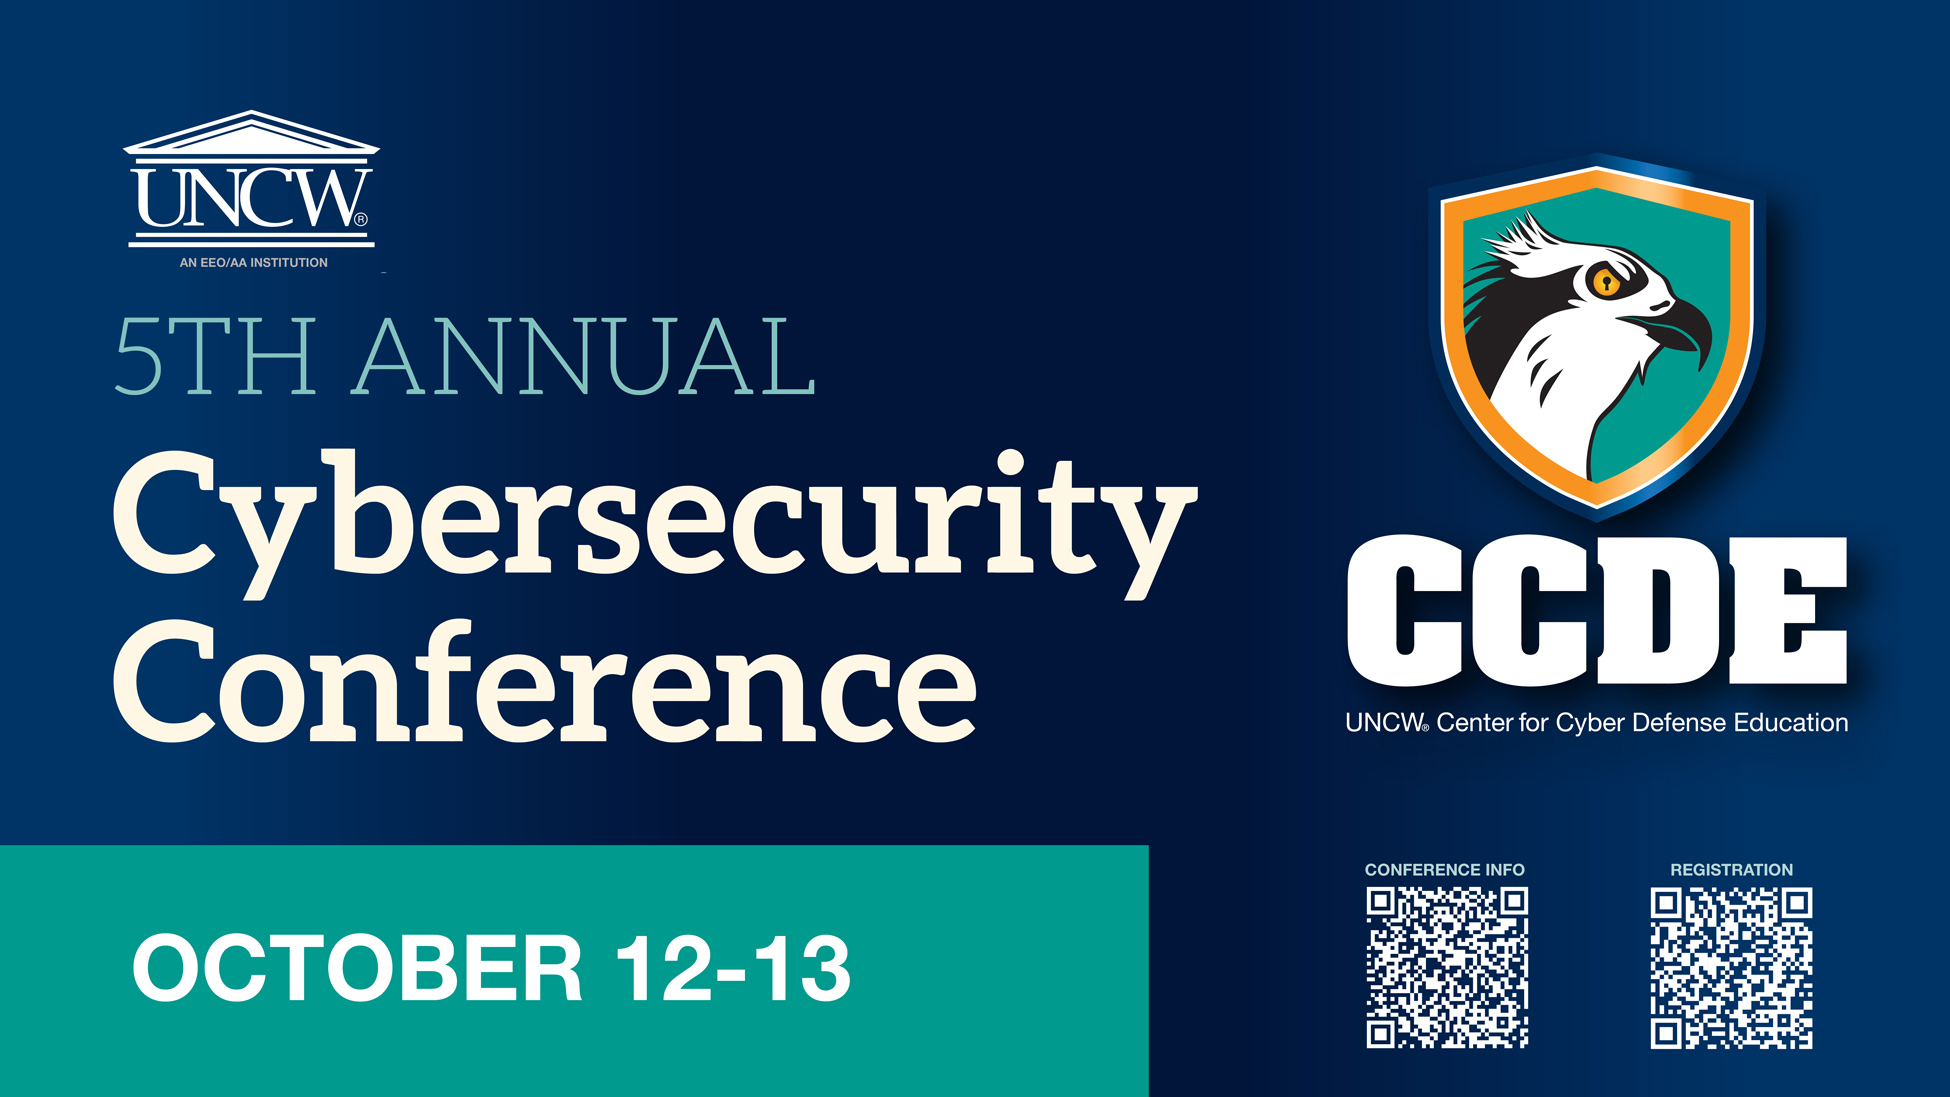 5th Annual Cybersecurity Conference October 12-13 from the UNCW center for cyber defense education